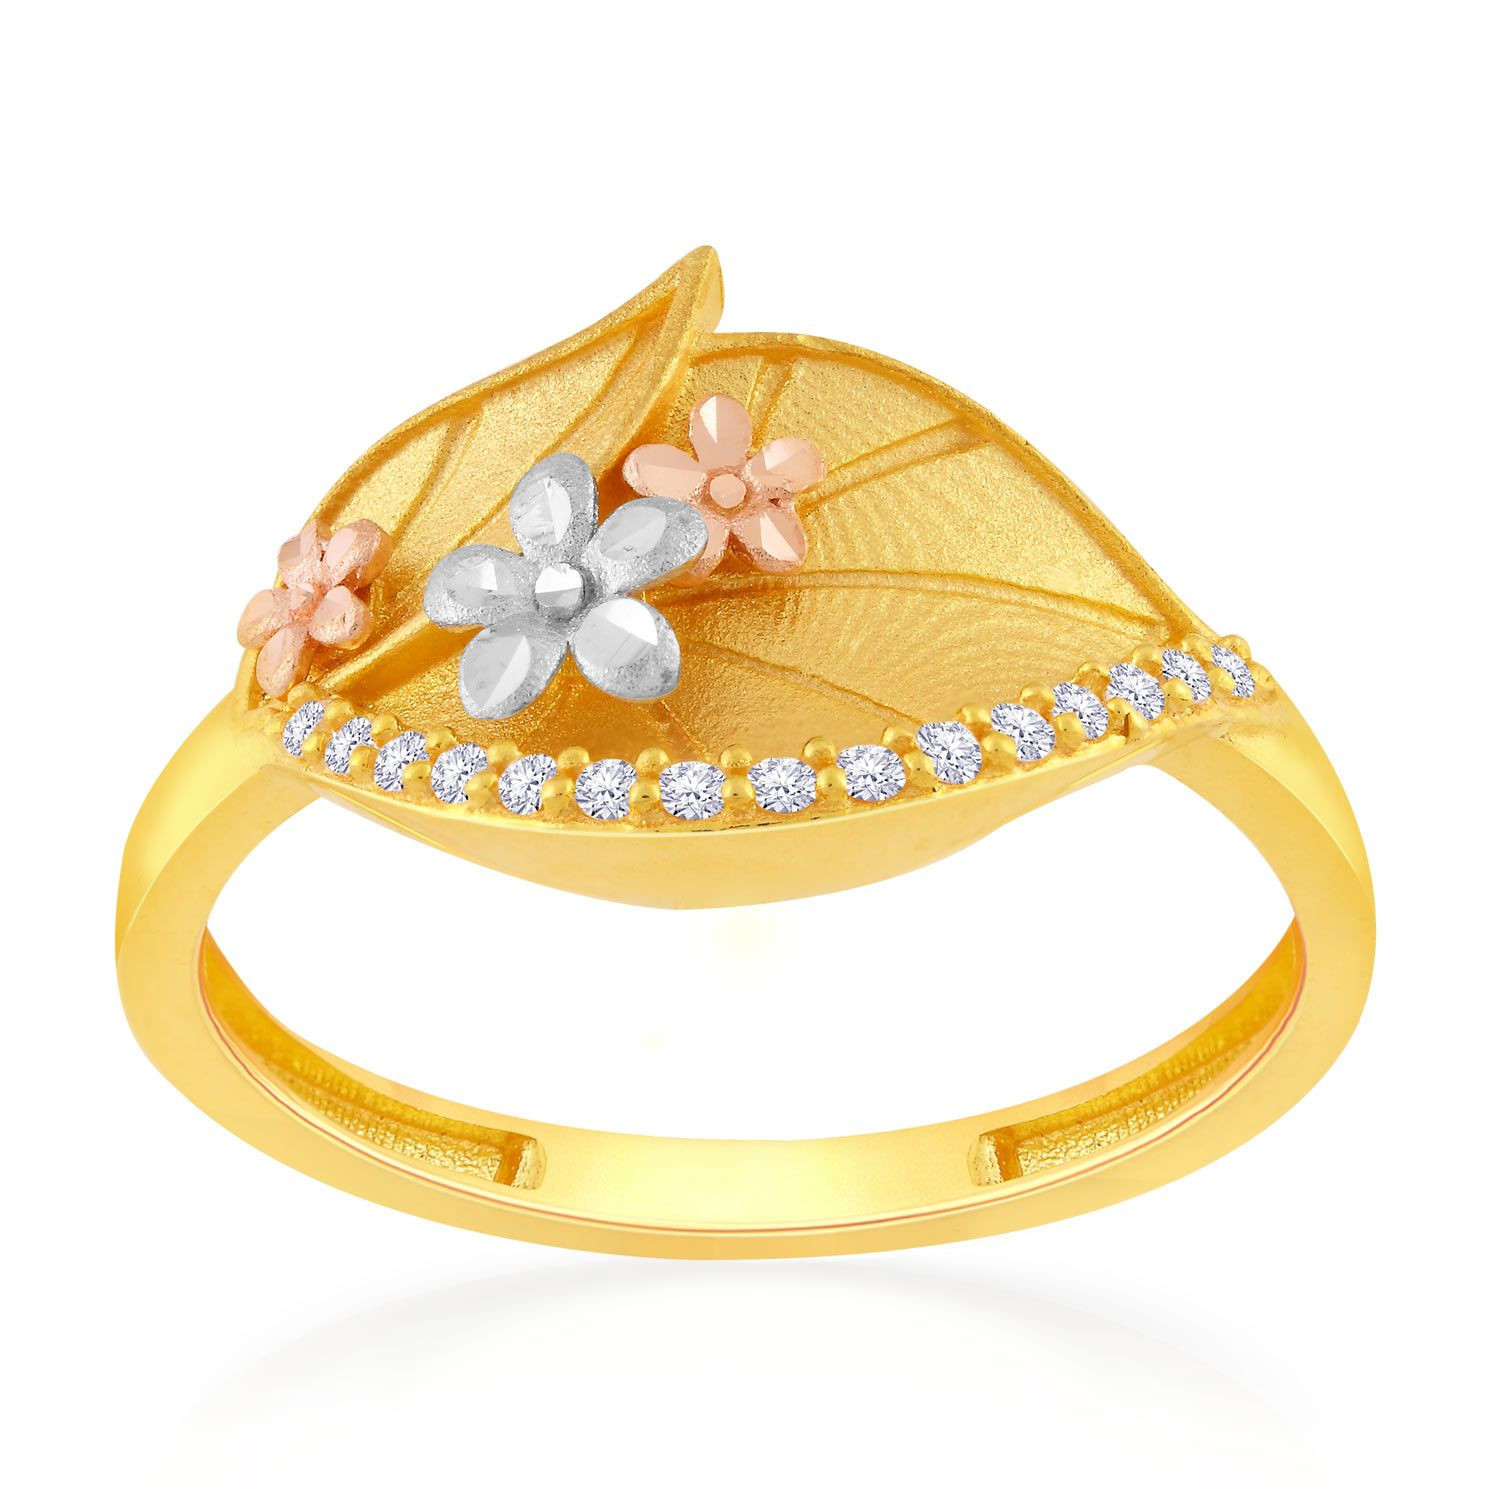 Malabar Gold & Diamonds 22KT Yellow Gold Ring for Women | Yellow gold rings,  Gold, Gold rings